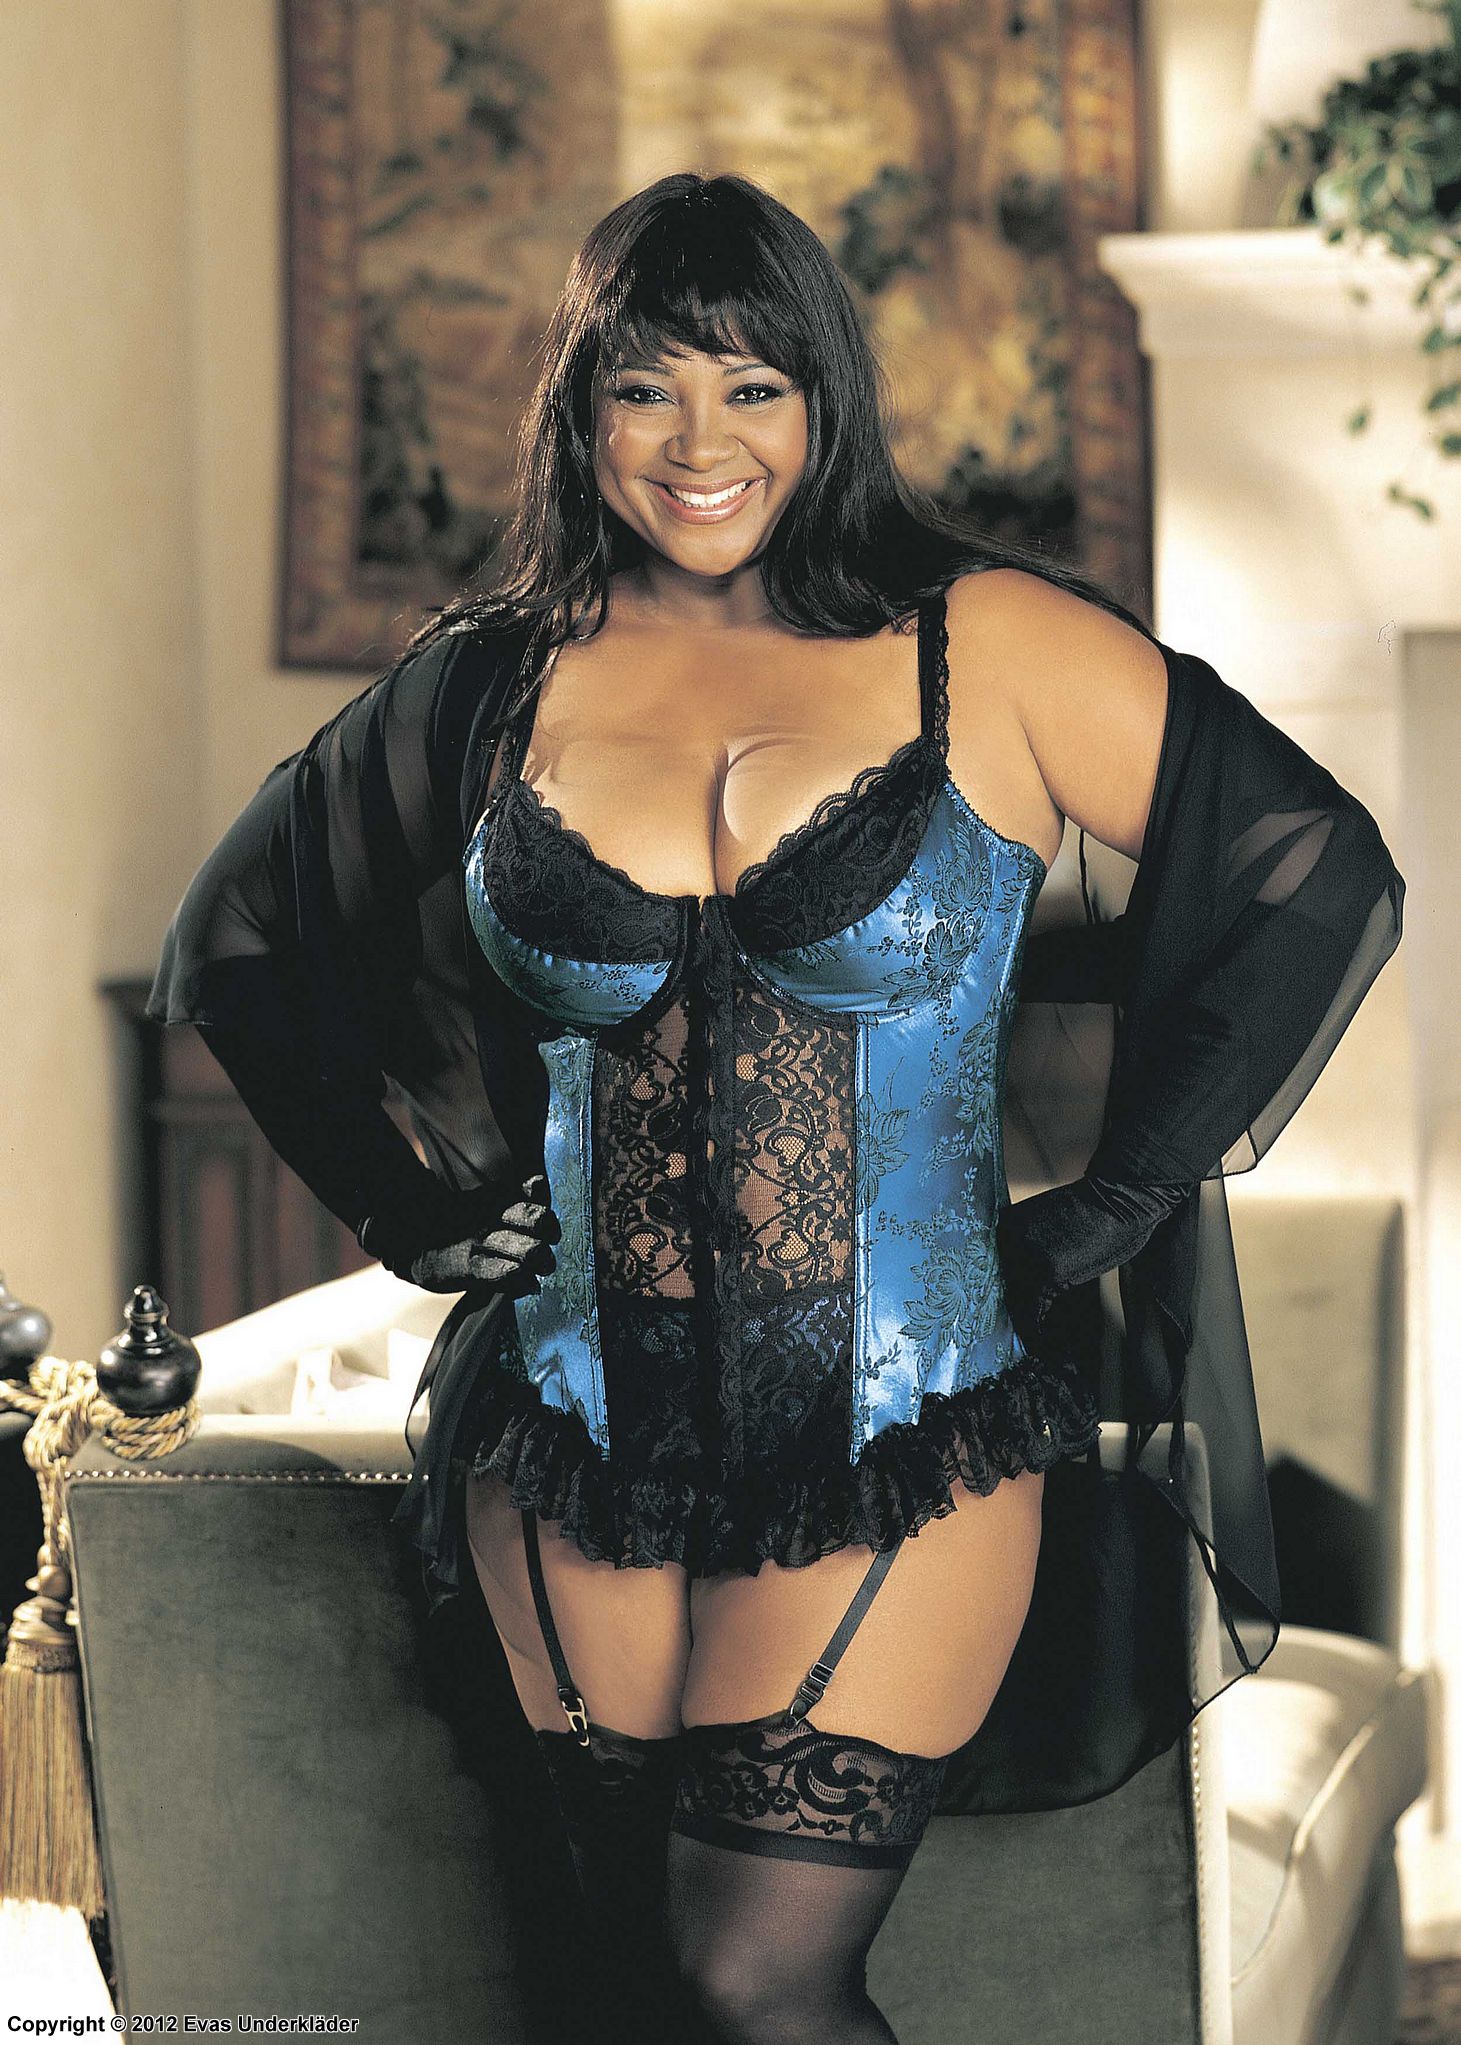 Underwire bustier, lace, embroidery, ruffle trim, plus size